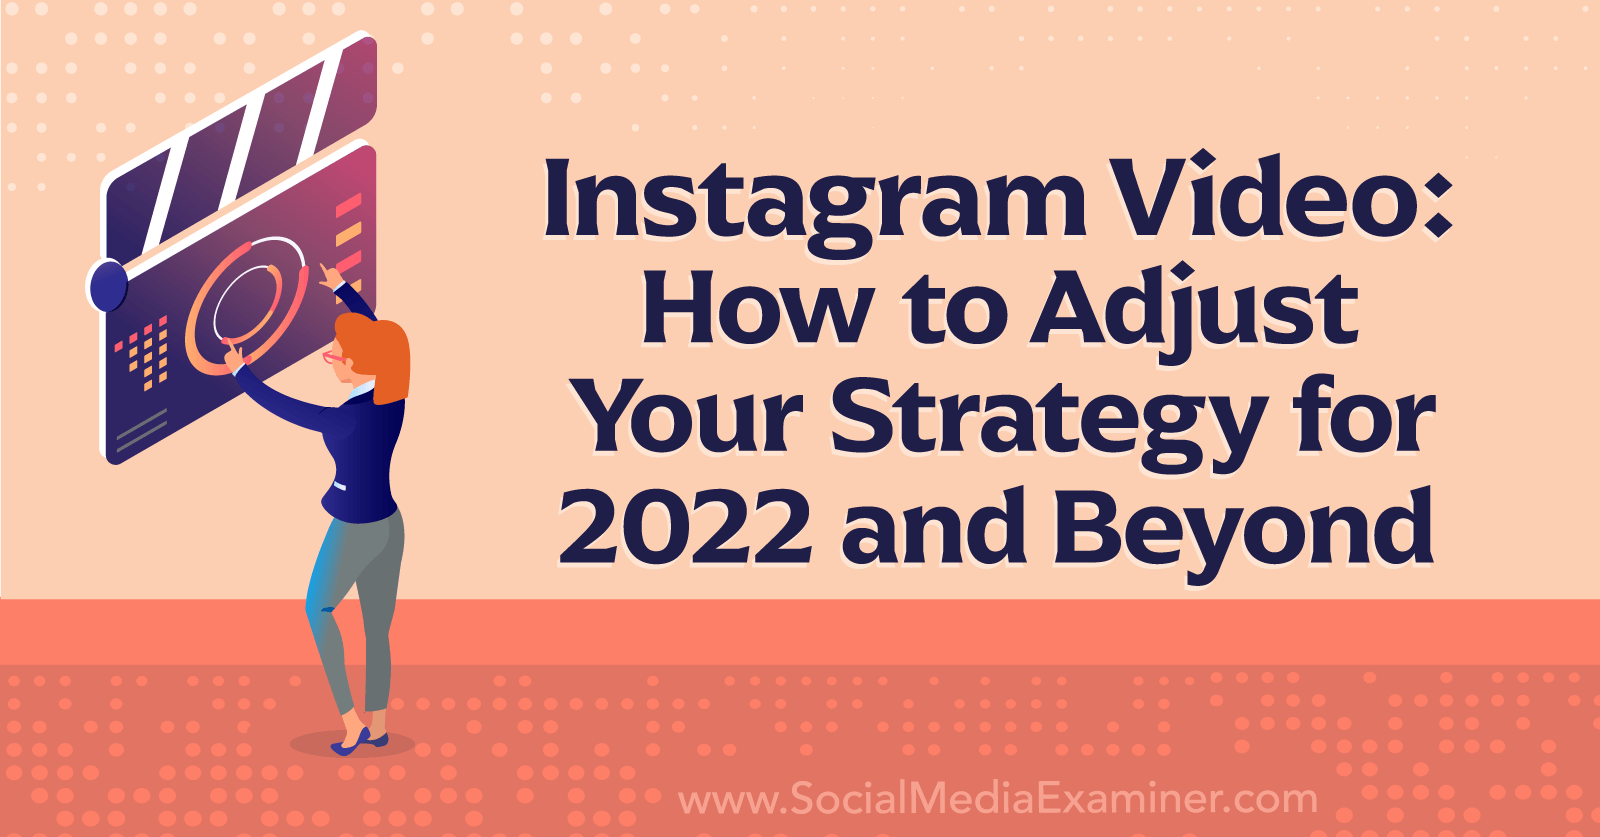 Instagram Video: How to Adjust Your Strategy for 2022 and Beyond-Social Media Examiner